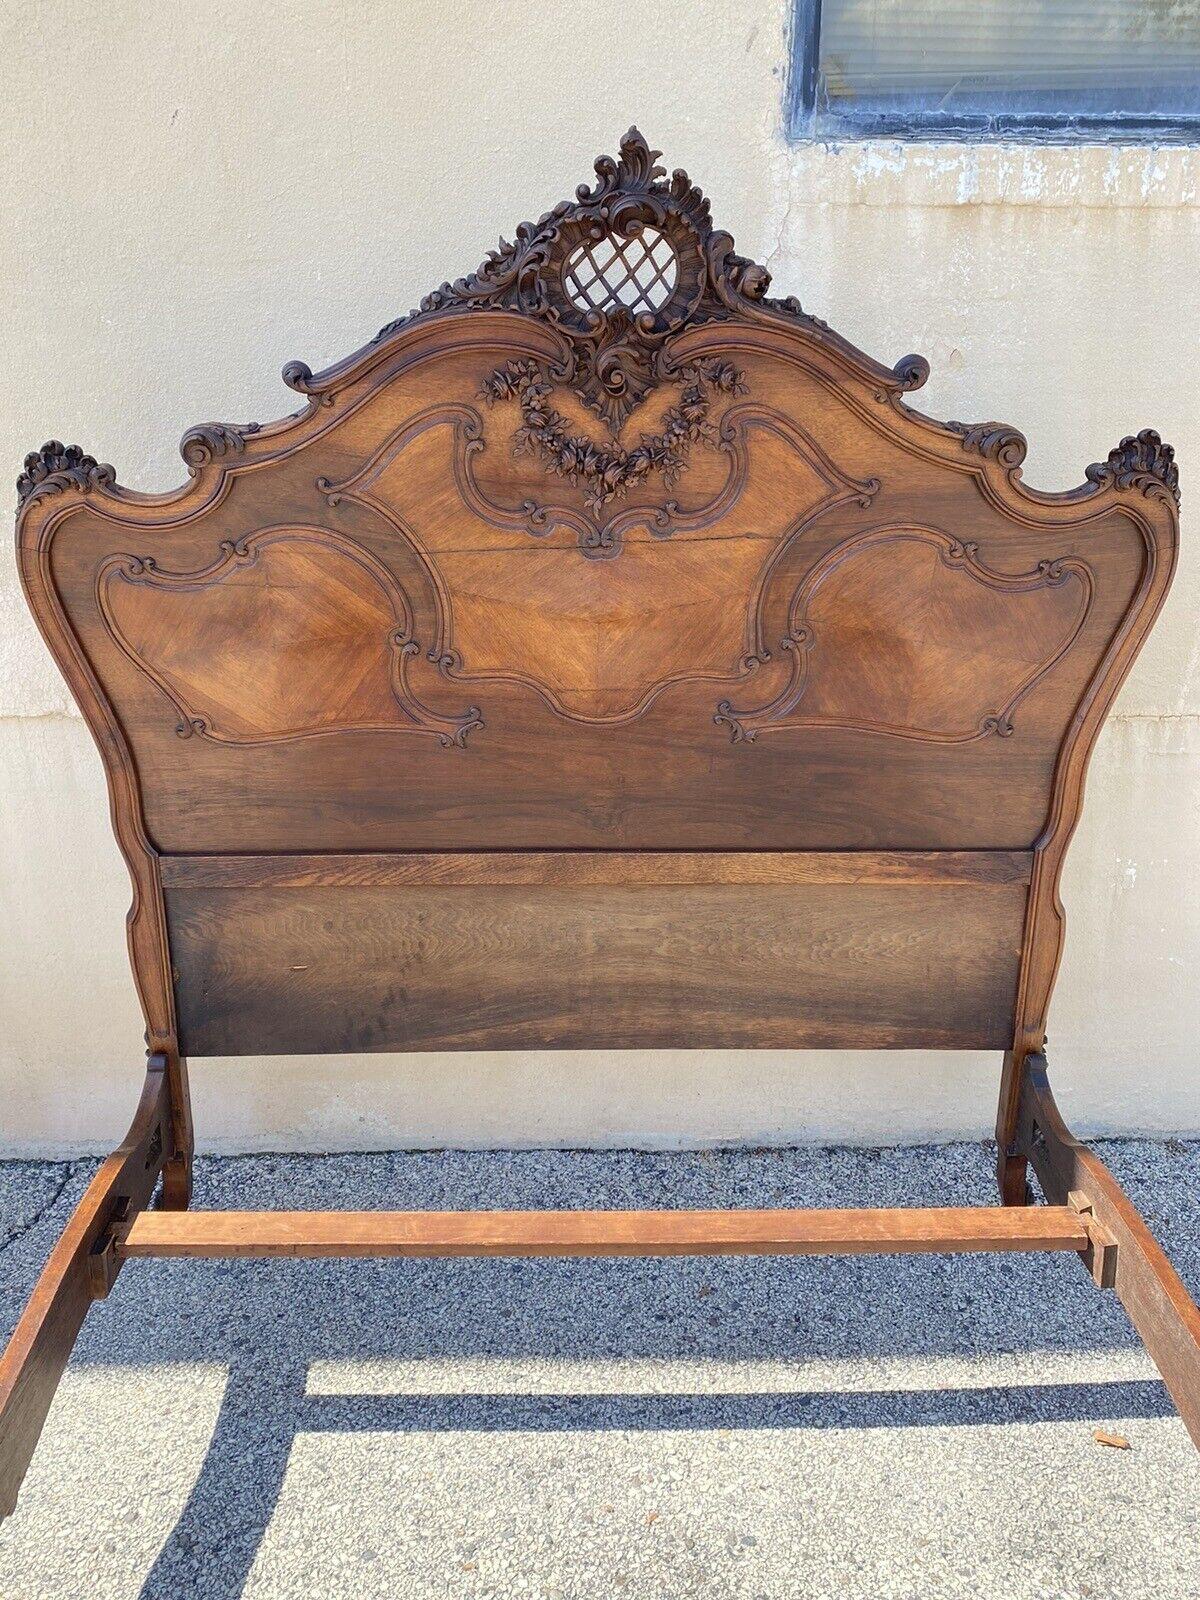 Antique French Rococo Louis XV Style Carved Walnut Cherubs & Heart Bed Frame In Good Condition For Sale In Philadelphia, PA